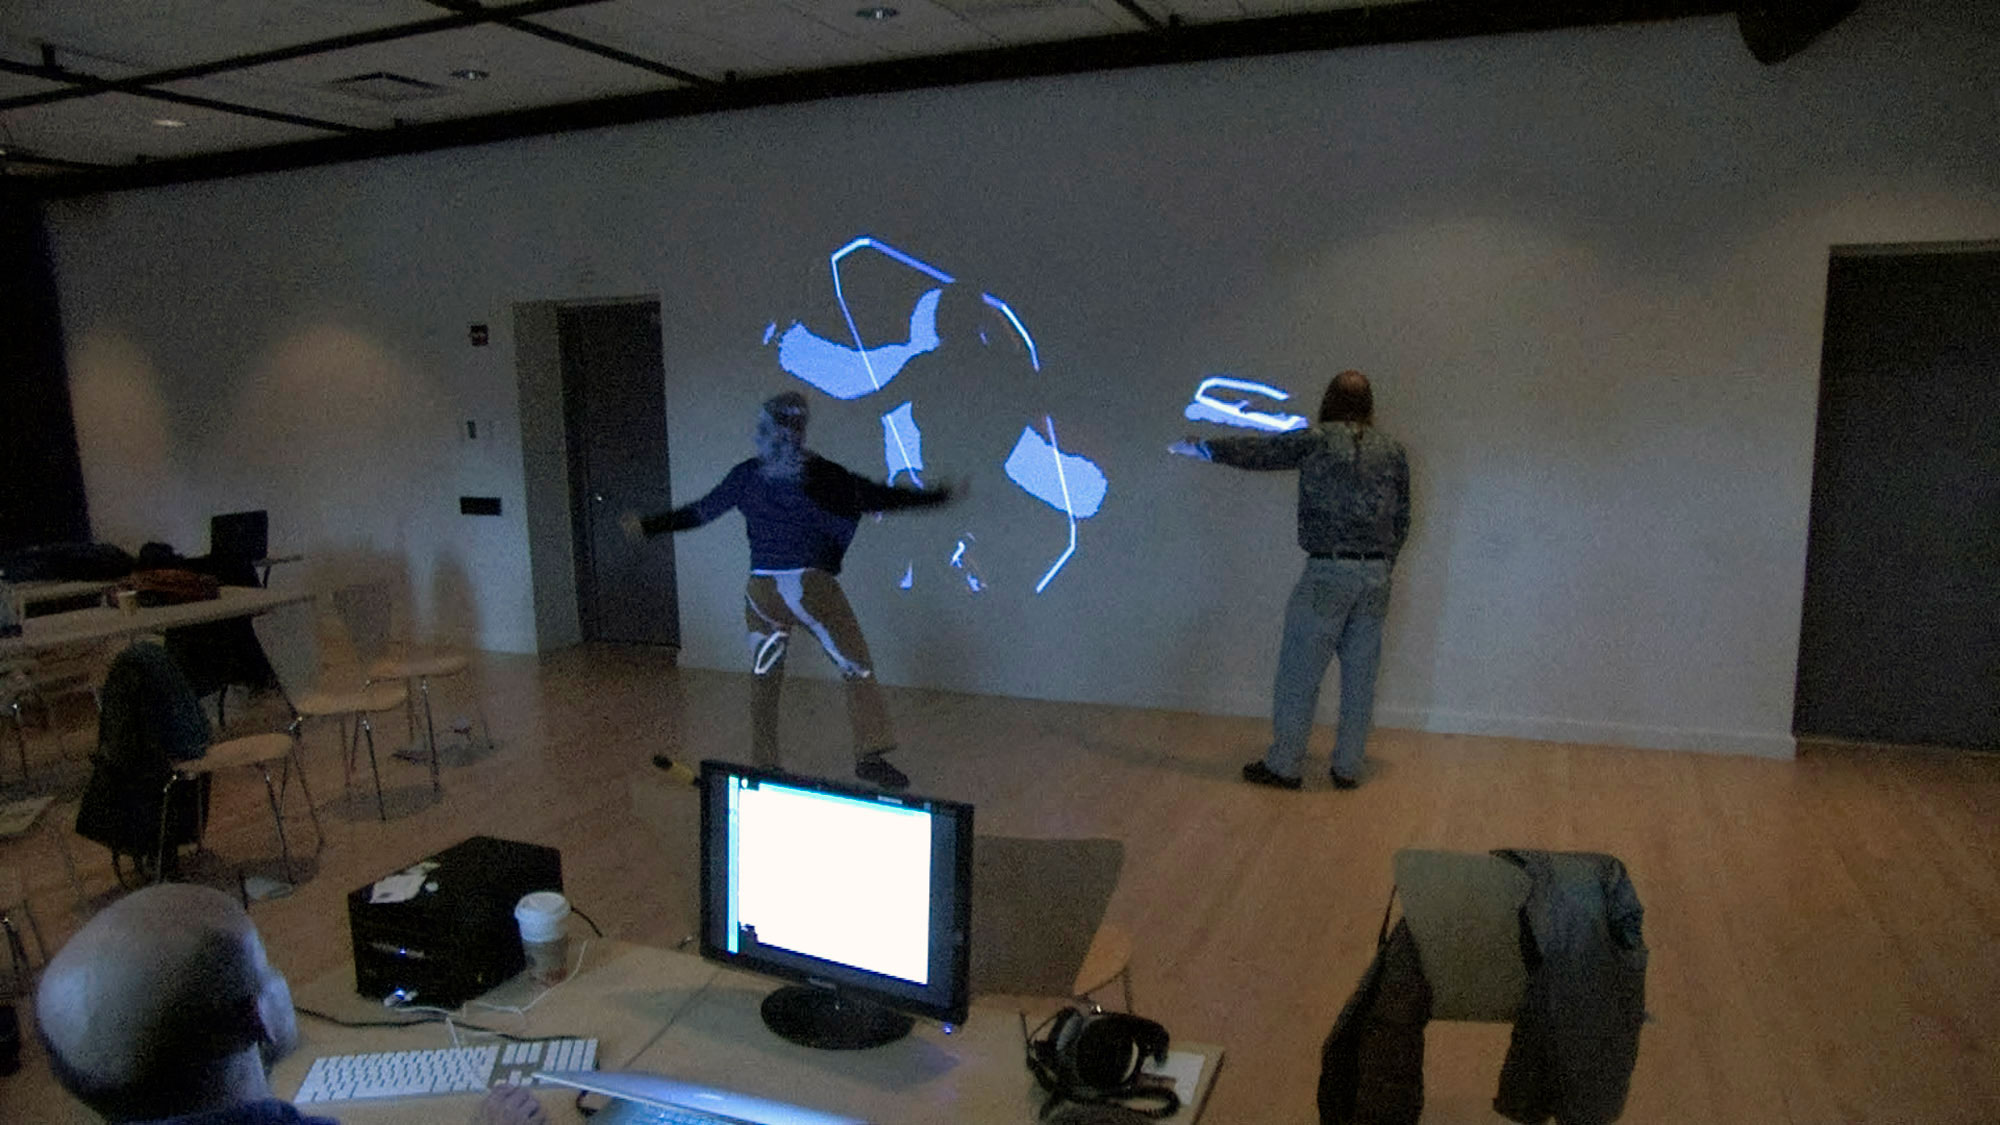 Two people with backs to the viewer interacting with a wall projection controlled by a bald man sitting at a computer in the foreground. 